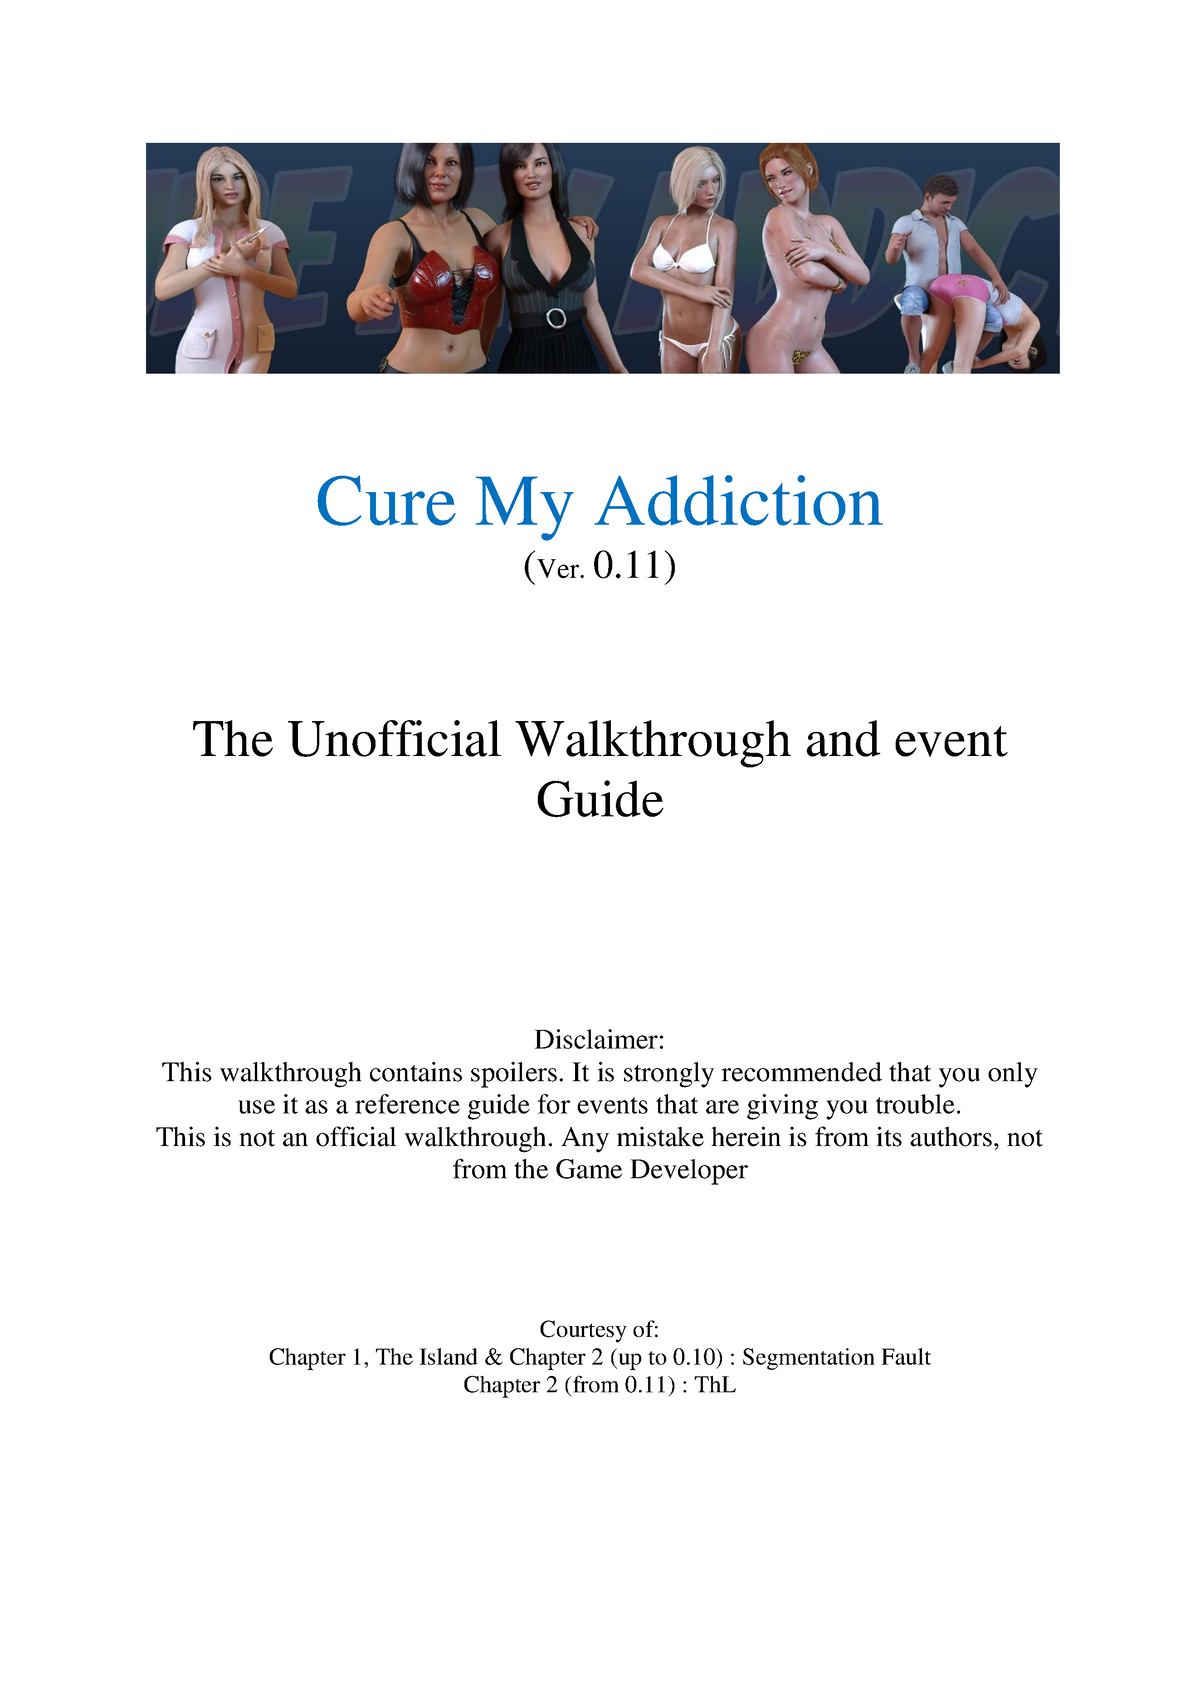 cure-my-addiction-walkthrough-cure-my-addiction-ver-0-the-unofficial-walkthrough-and-event